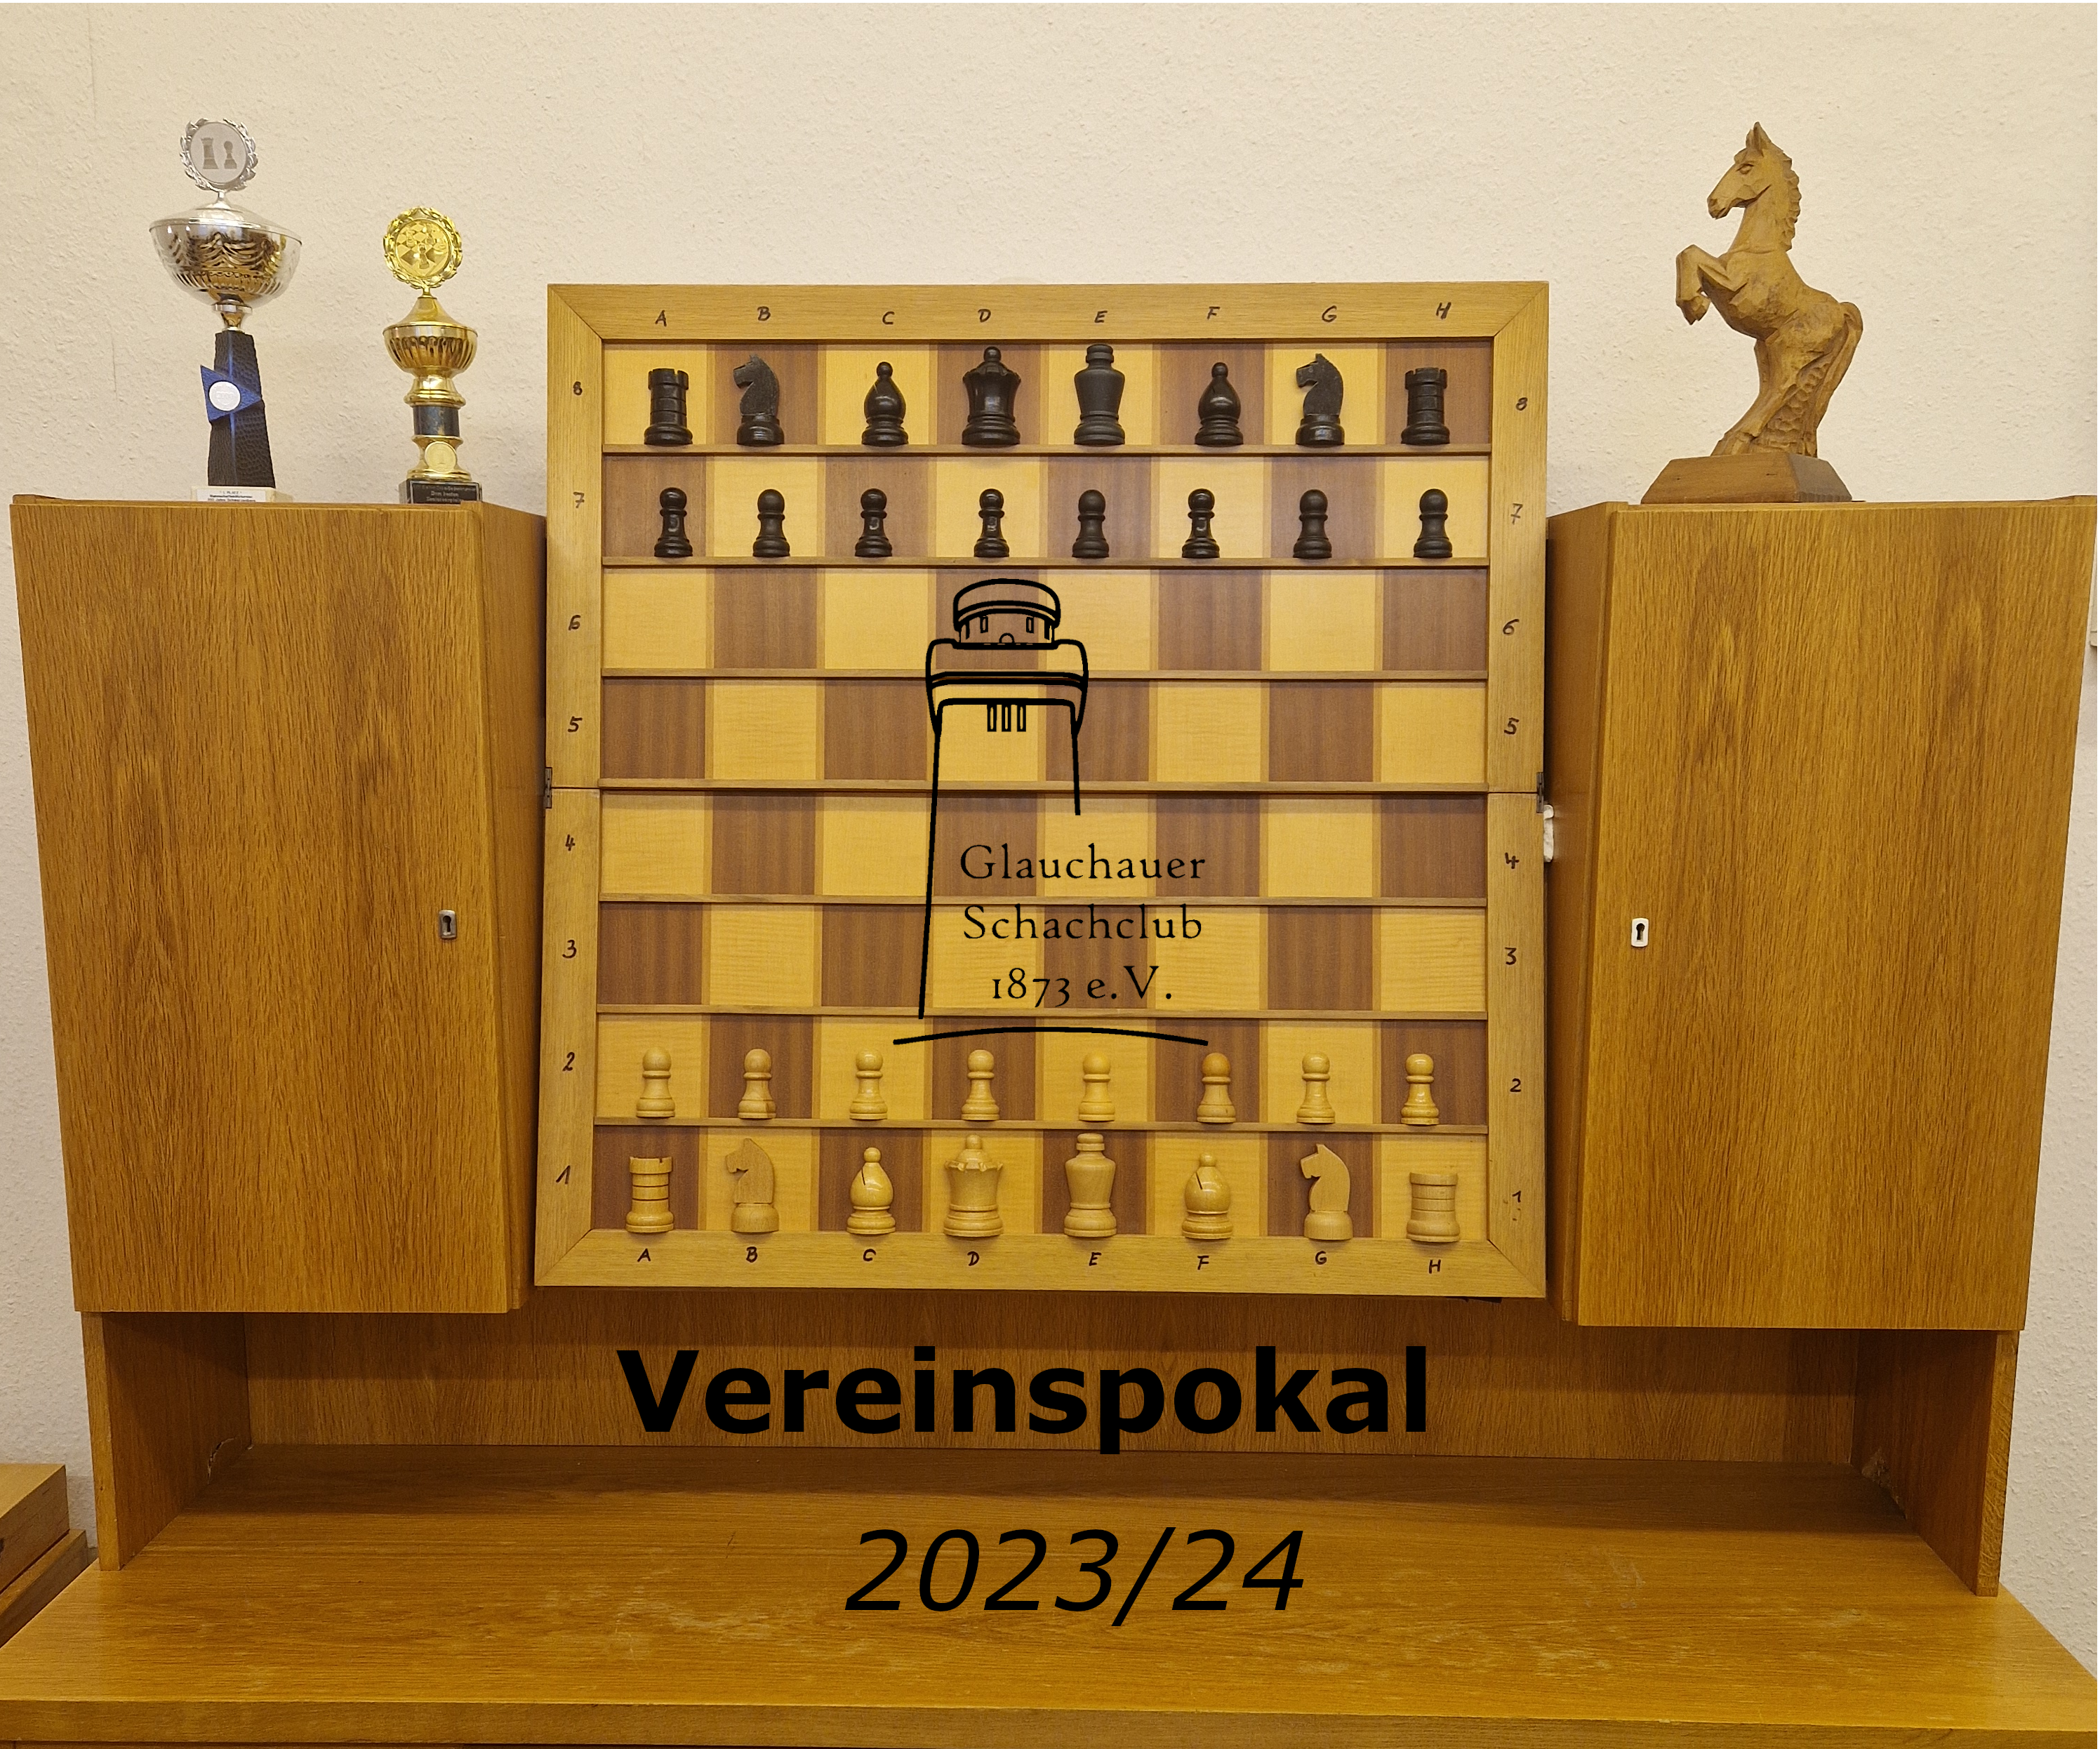 Read more about the article Vereinspokal 2023/2024